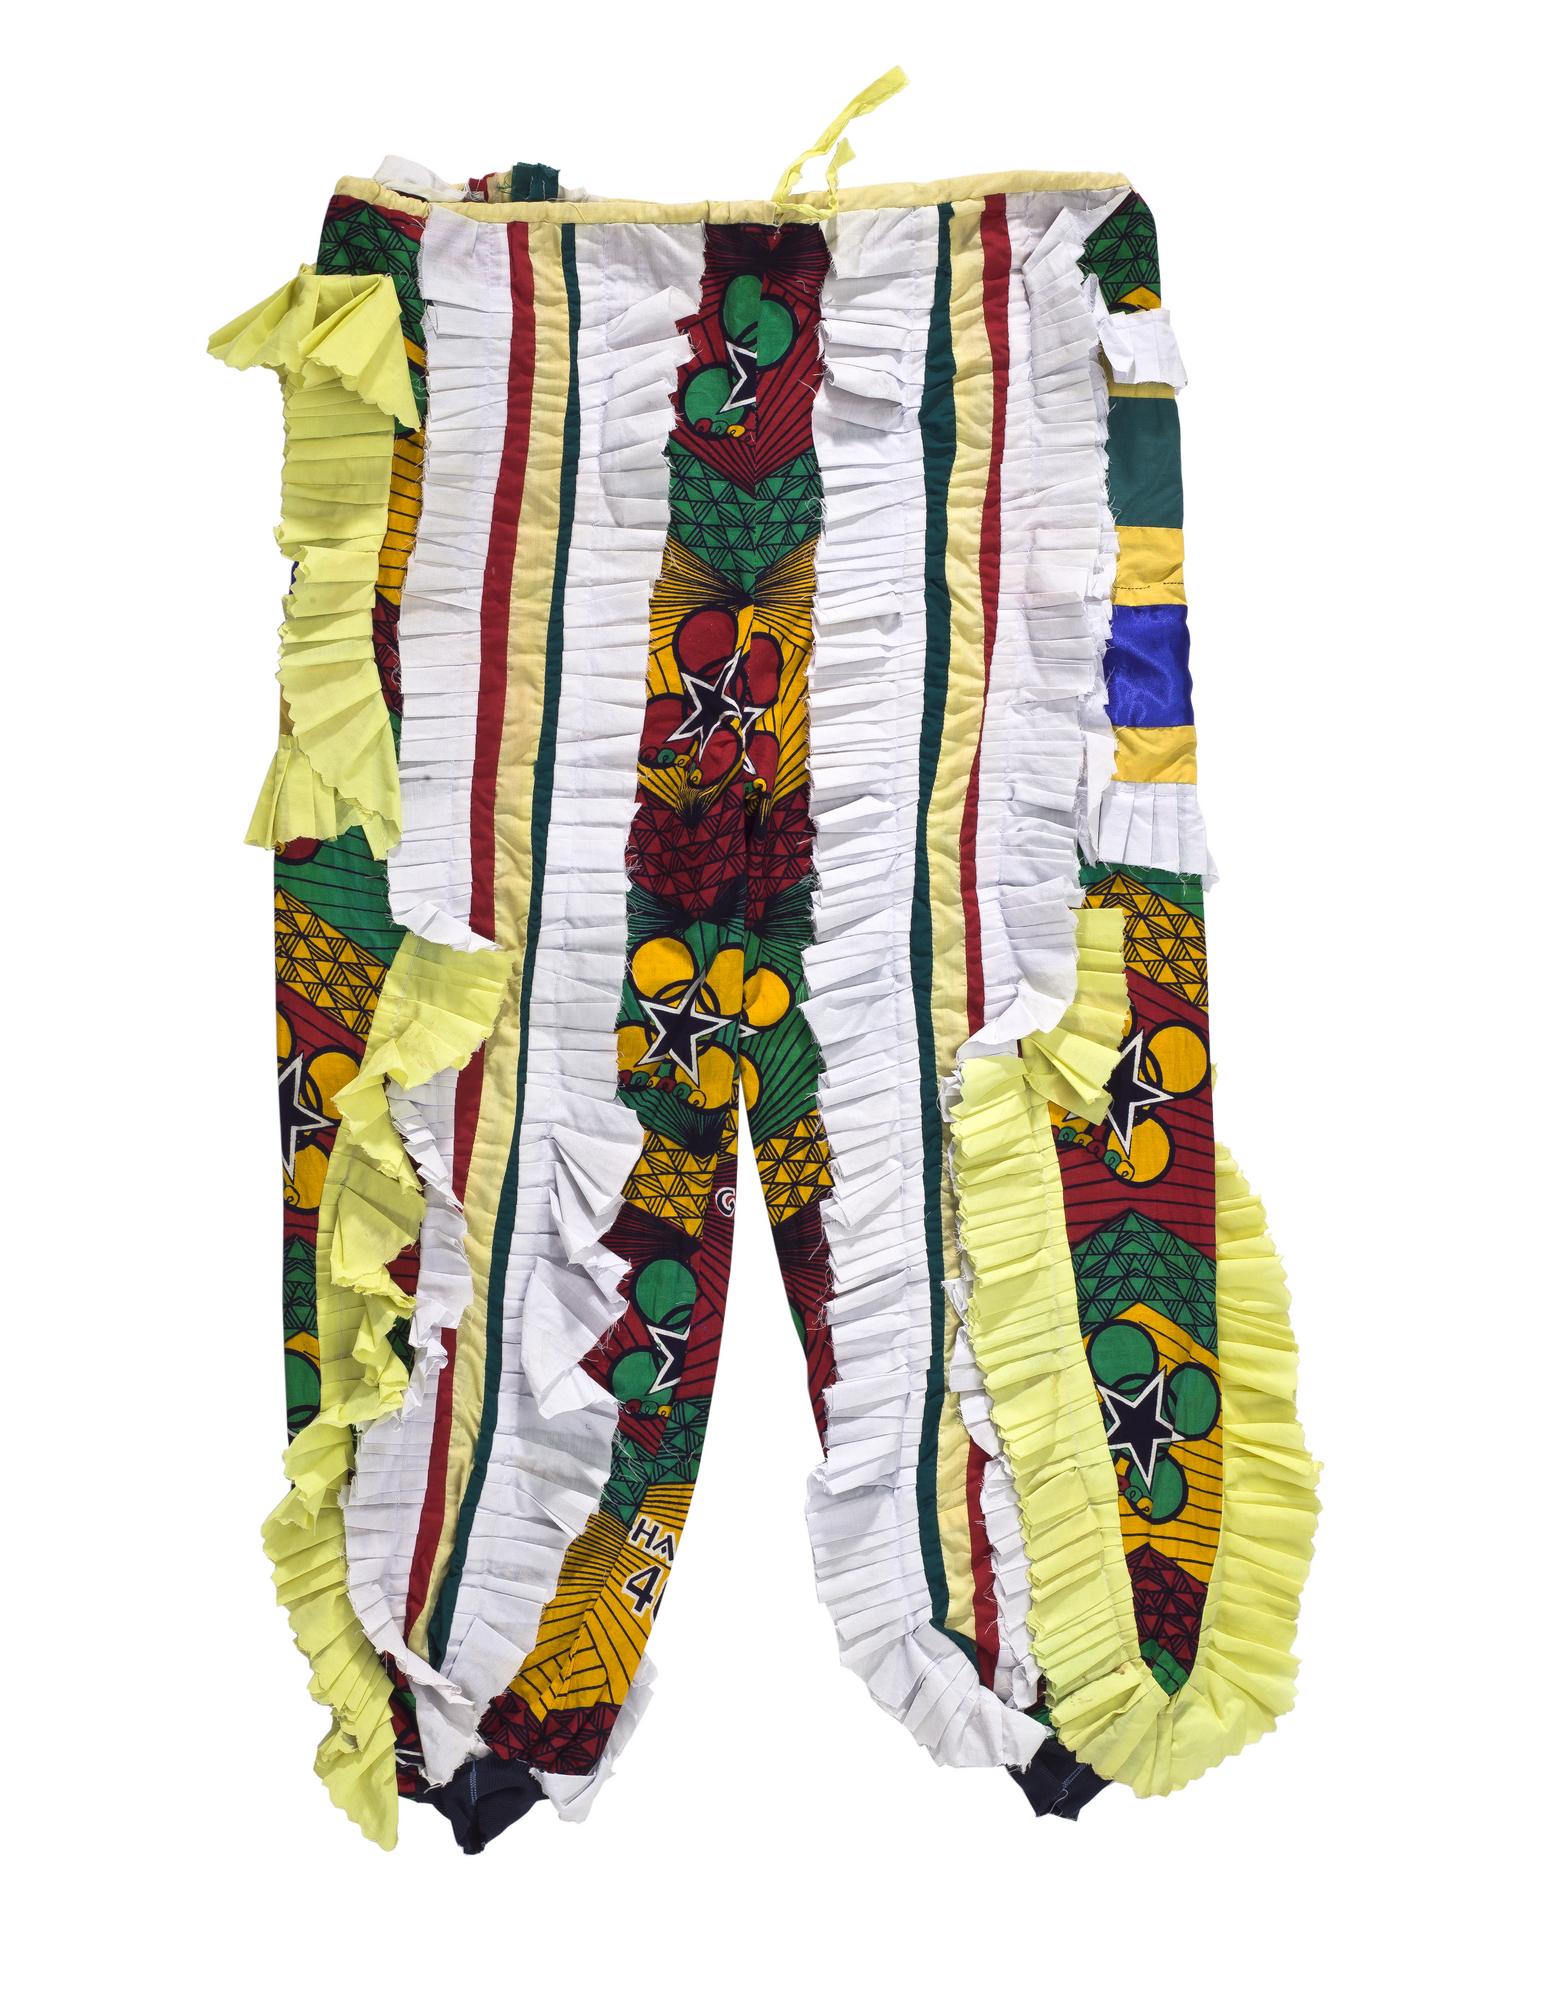 Drawstring trousers to be worn with an Ugly Man fancy dress masquerade costume, made of printed fabric designed to commemorate 40 years of Ghana's independence, purchased from a tailor in Winneba by D.A. Acquandoh (Hippies): Africa, West Africa, Ghana, Elmina, collected in 2000 - 2001 